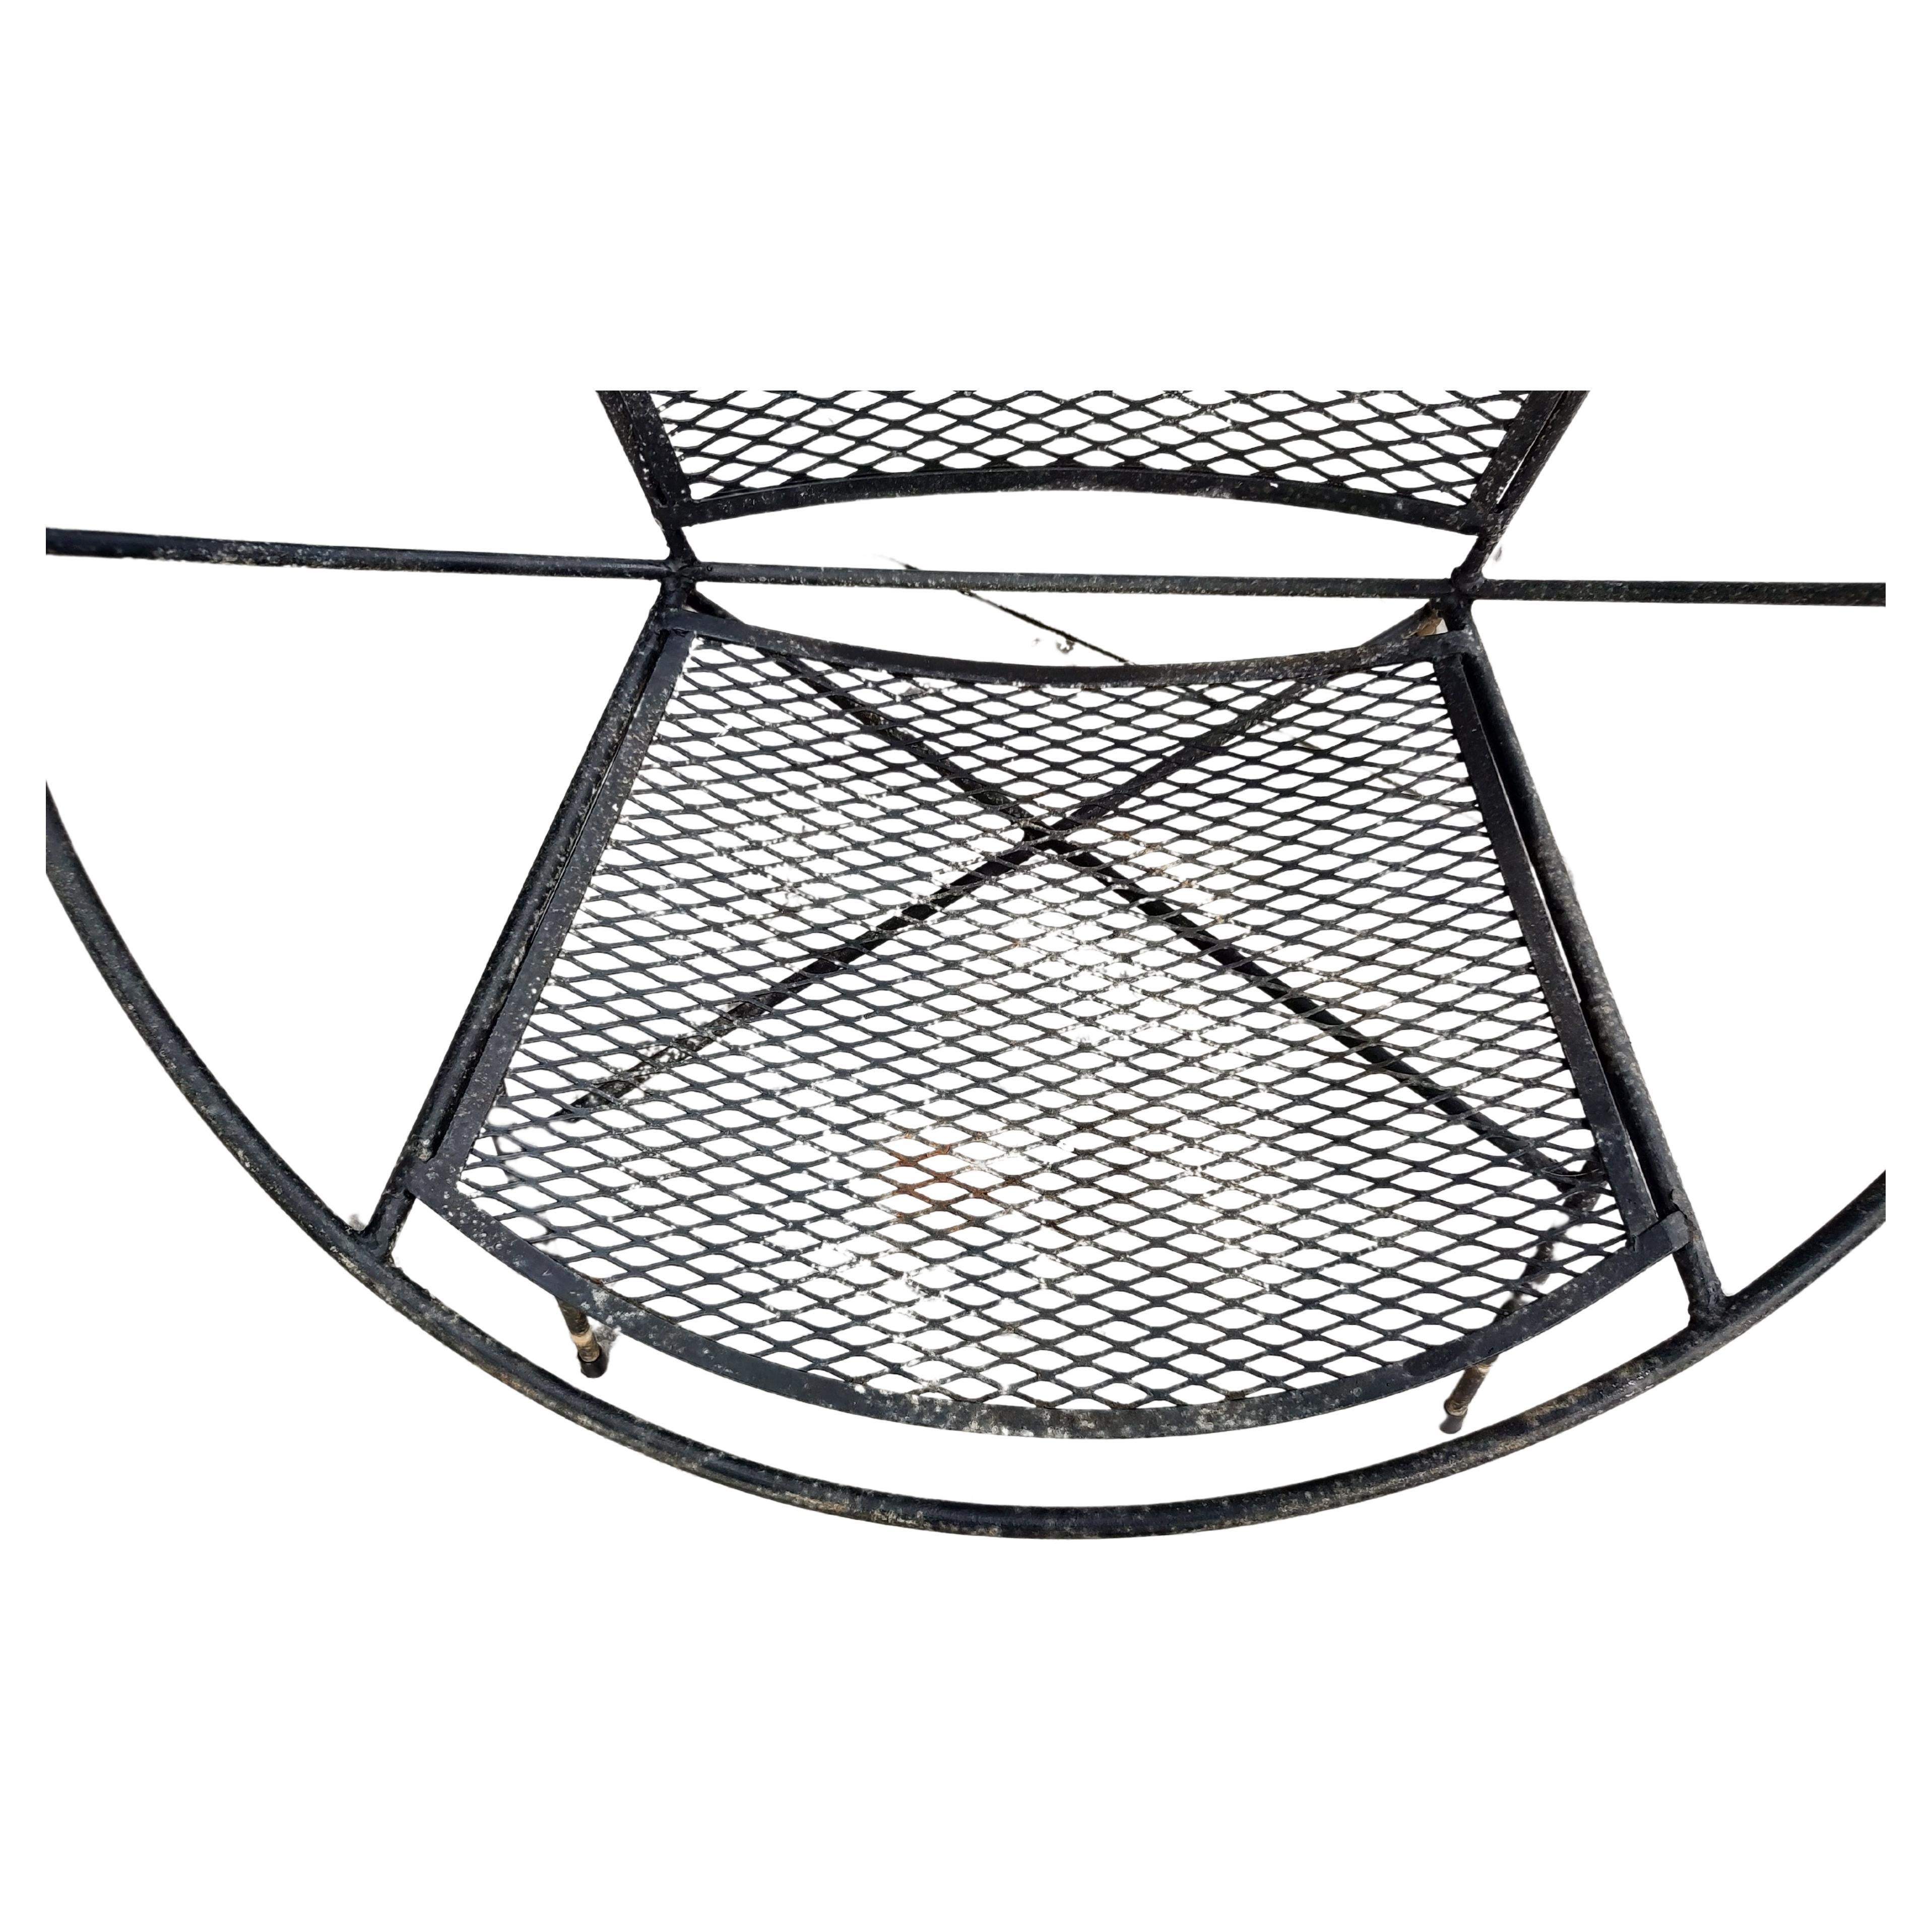 American Mid-Century Modern Iron Hoop Lounge Chair by Maurizio Tempestini for Salterini  For Sale